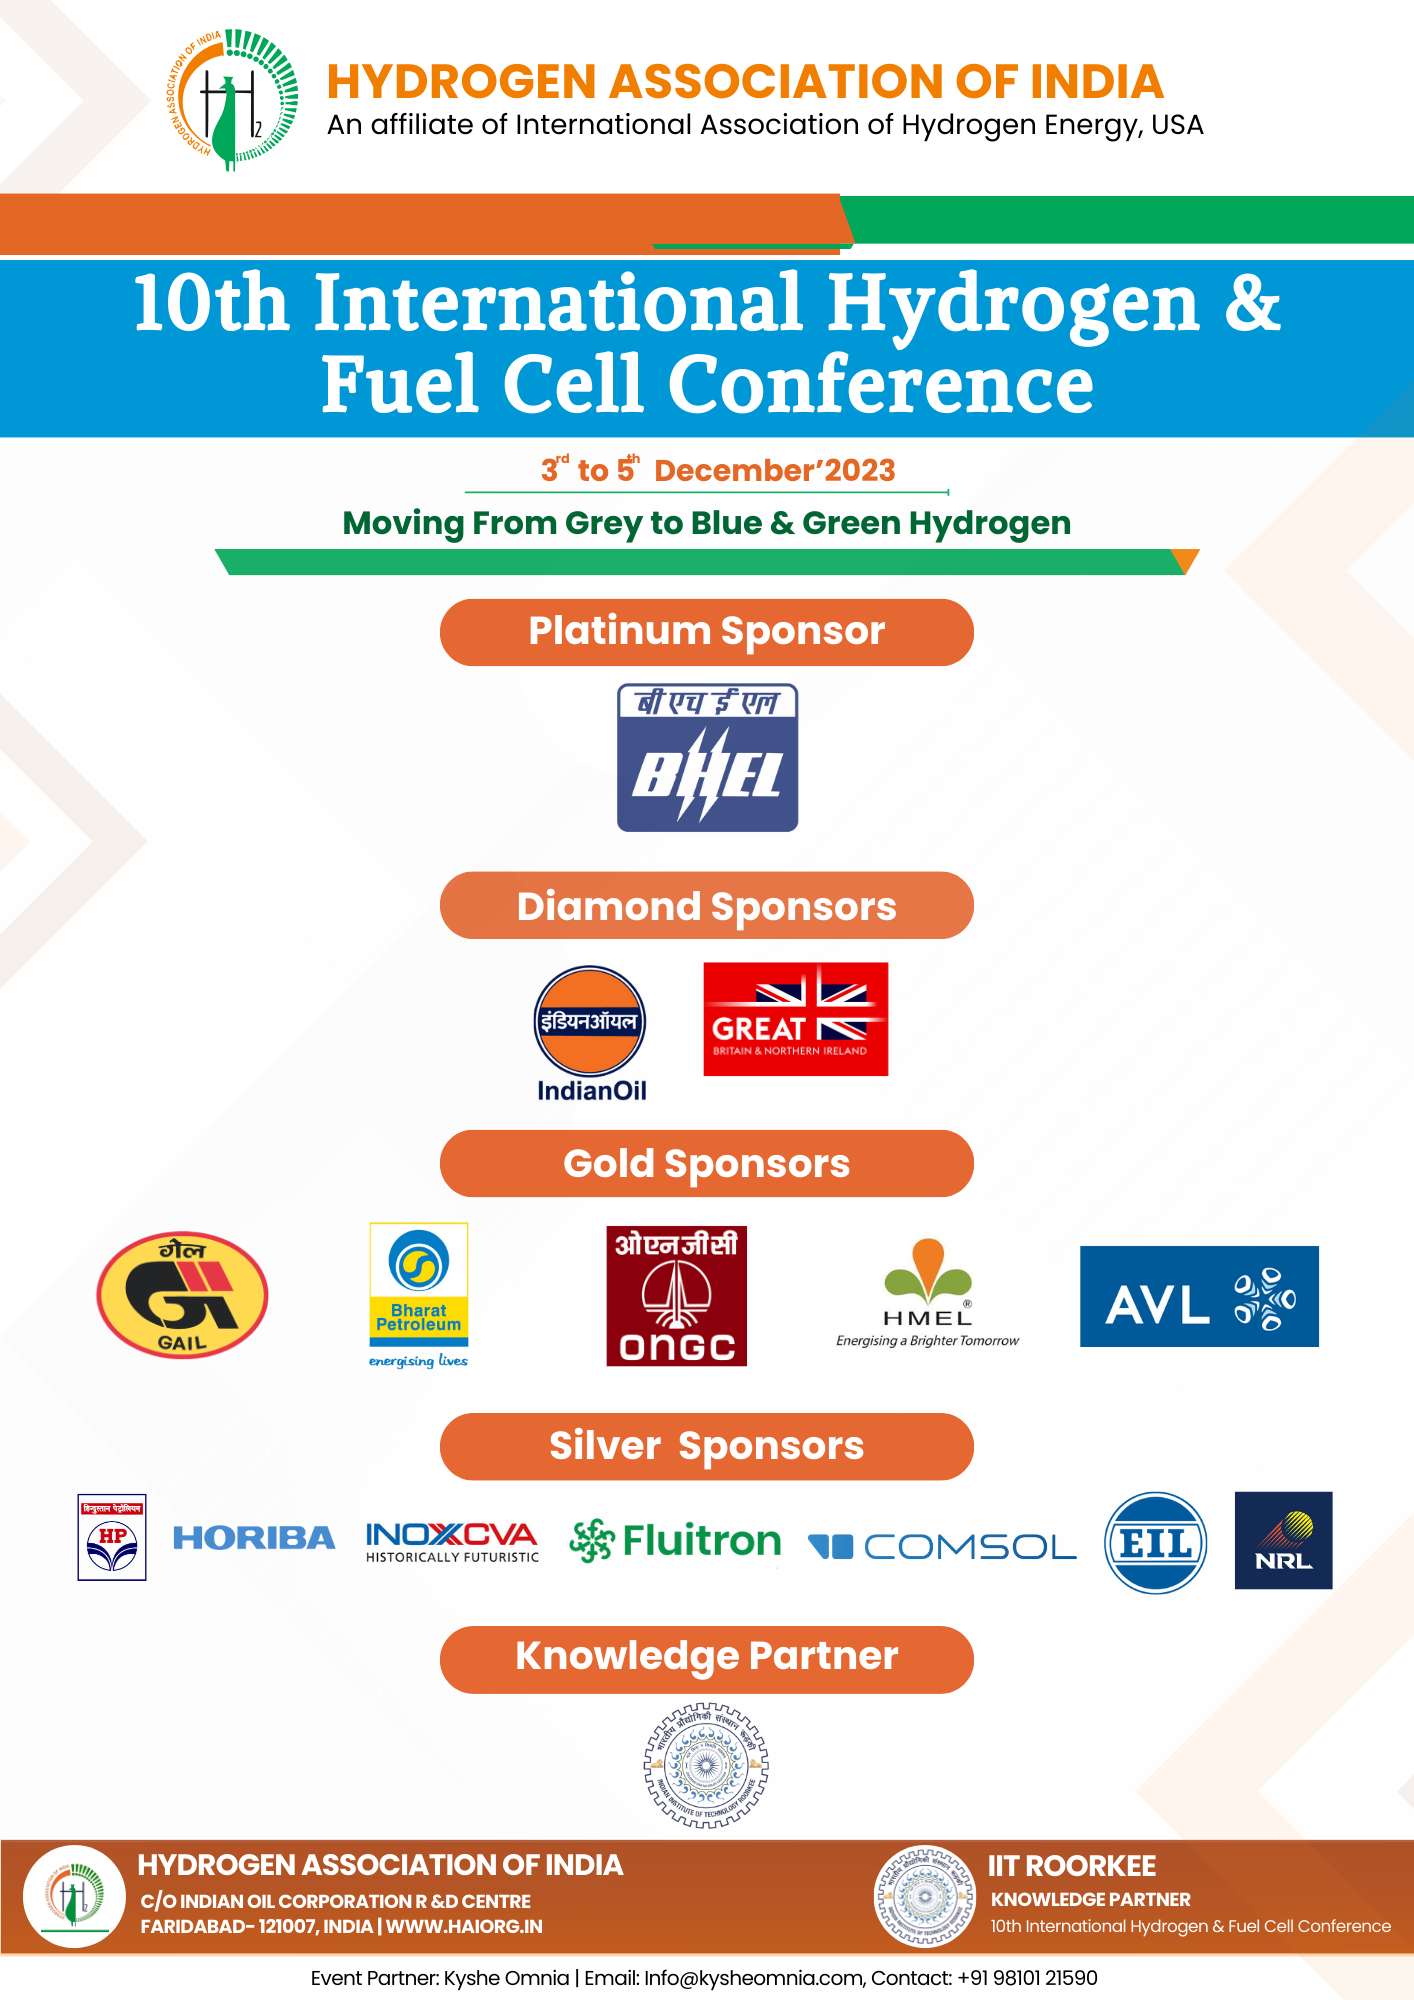 10th international hydrogen & fuel cell conference sponsors & partners